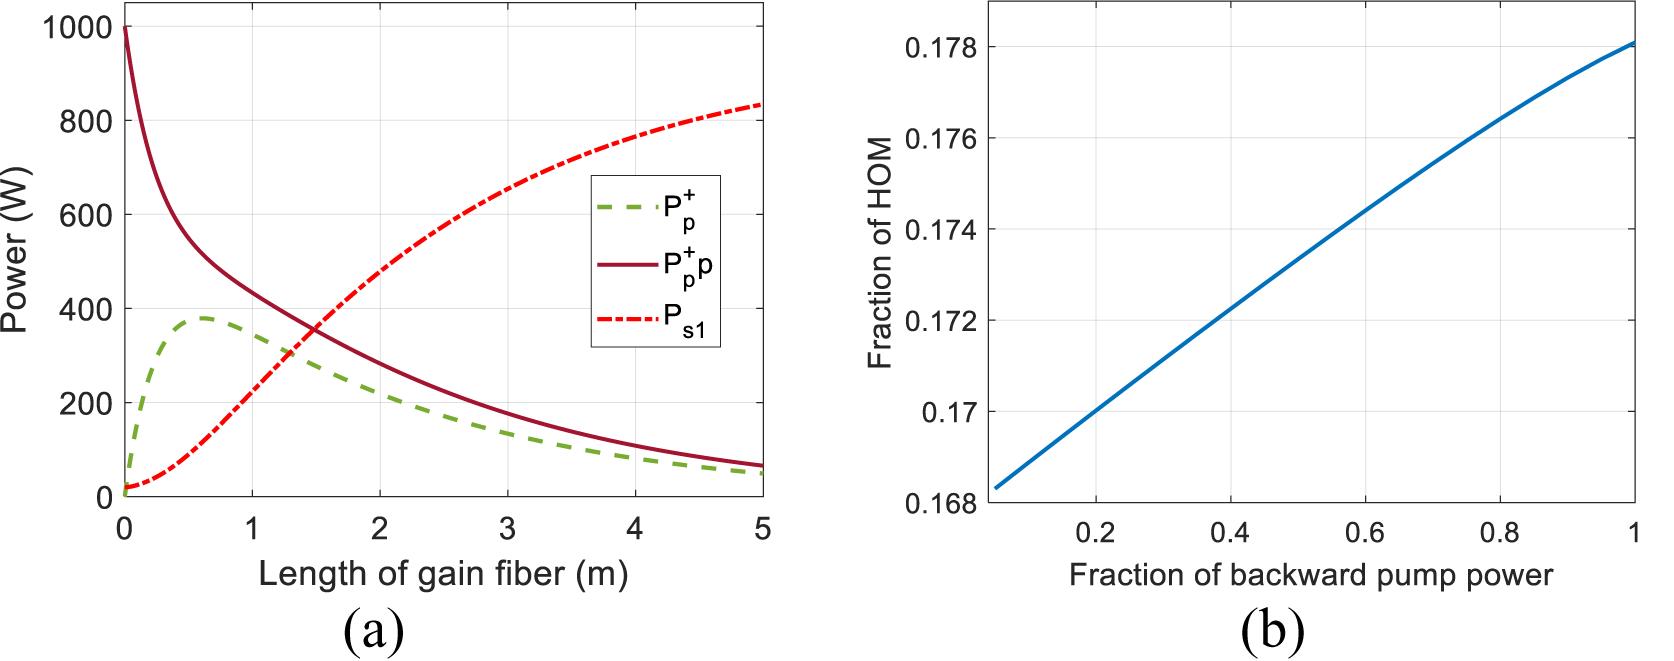 (a) Power distribution and (b) fraction of the HOM in the DSCCP fiber amplifier.